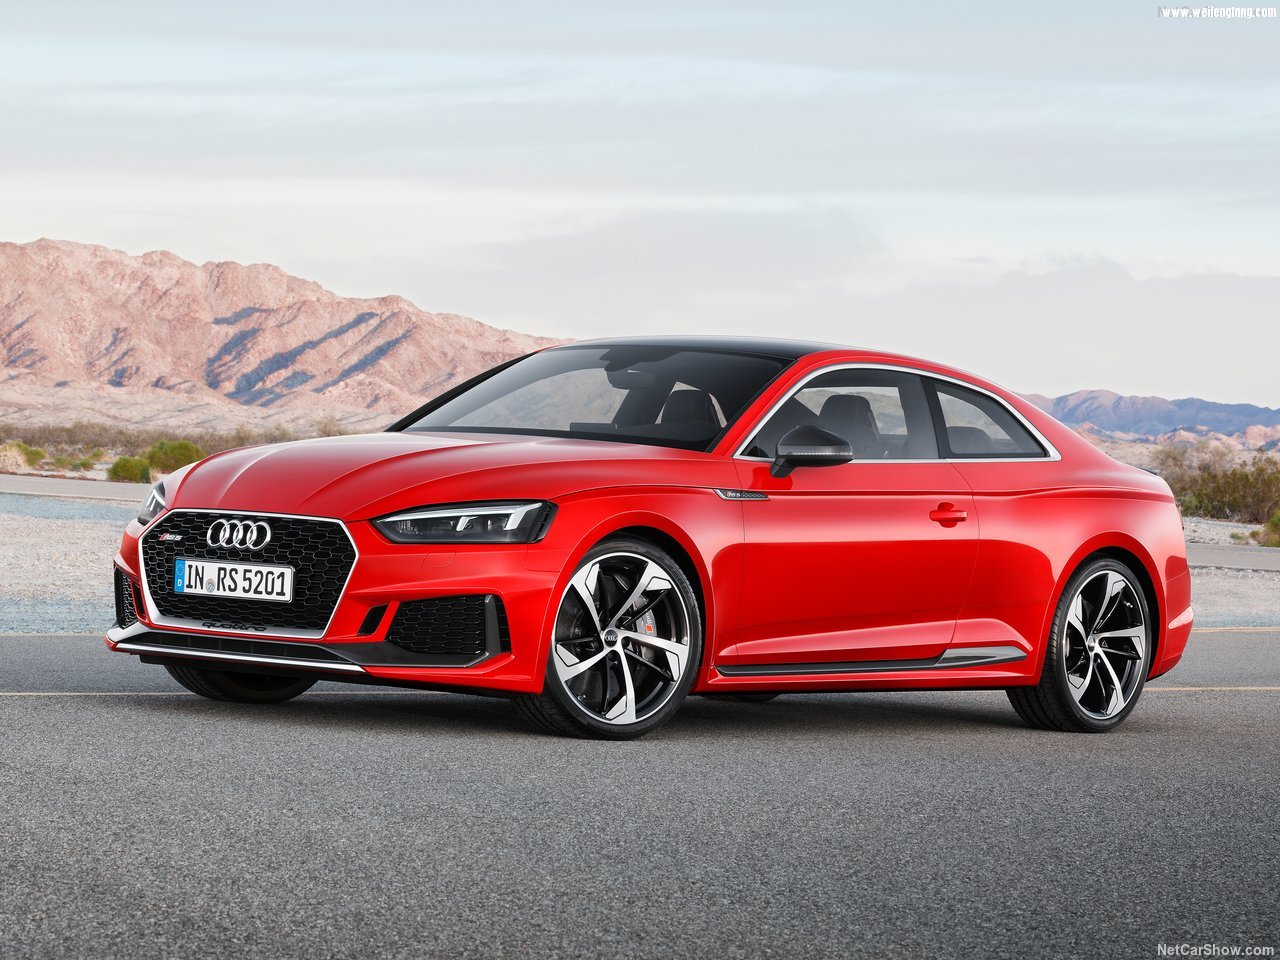 Audi-RS5_Coupe-2018-1280-05.jpg